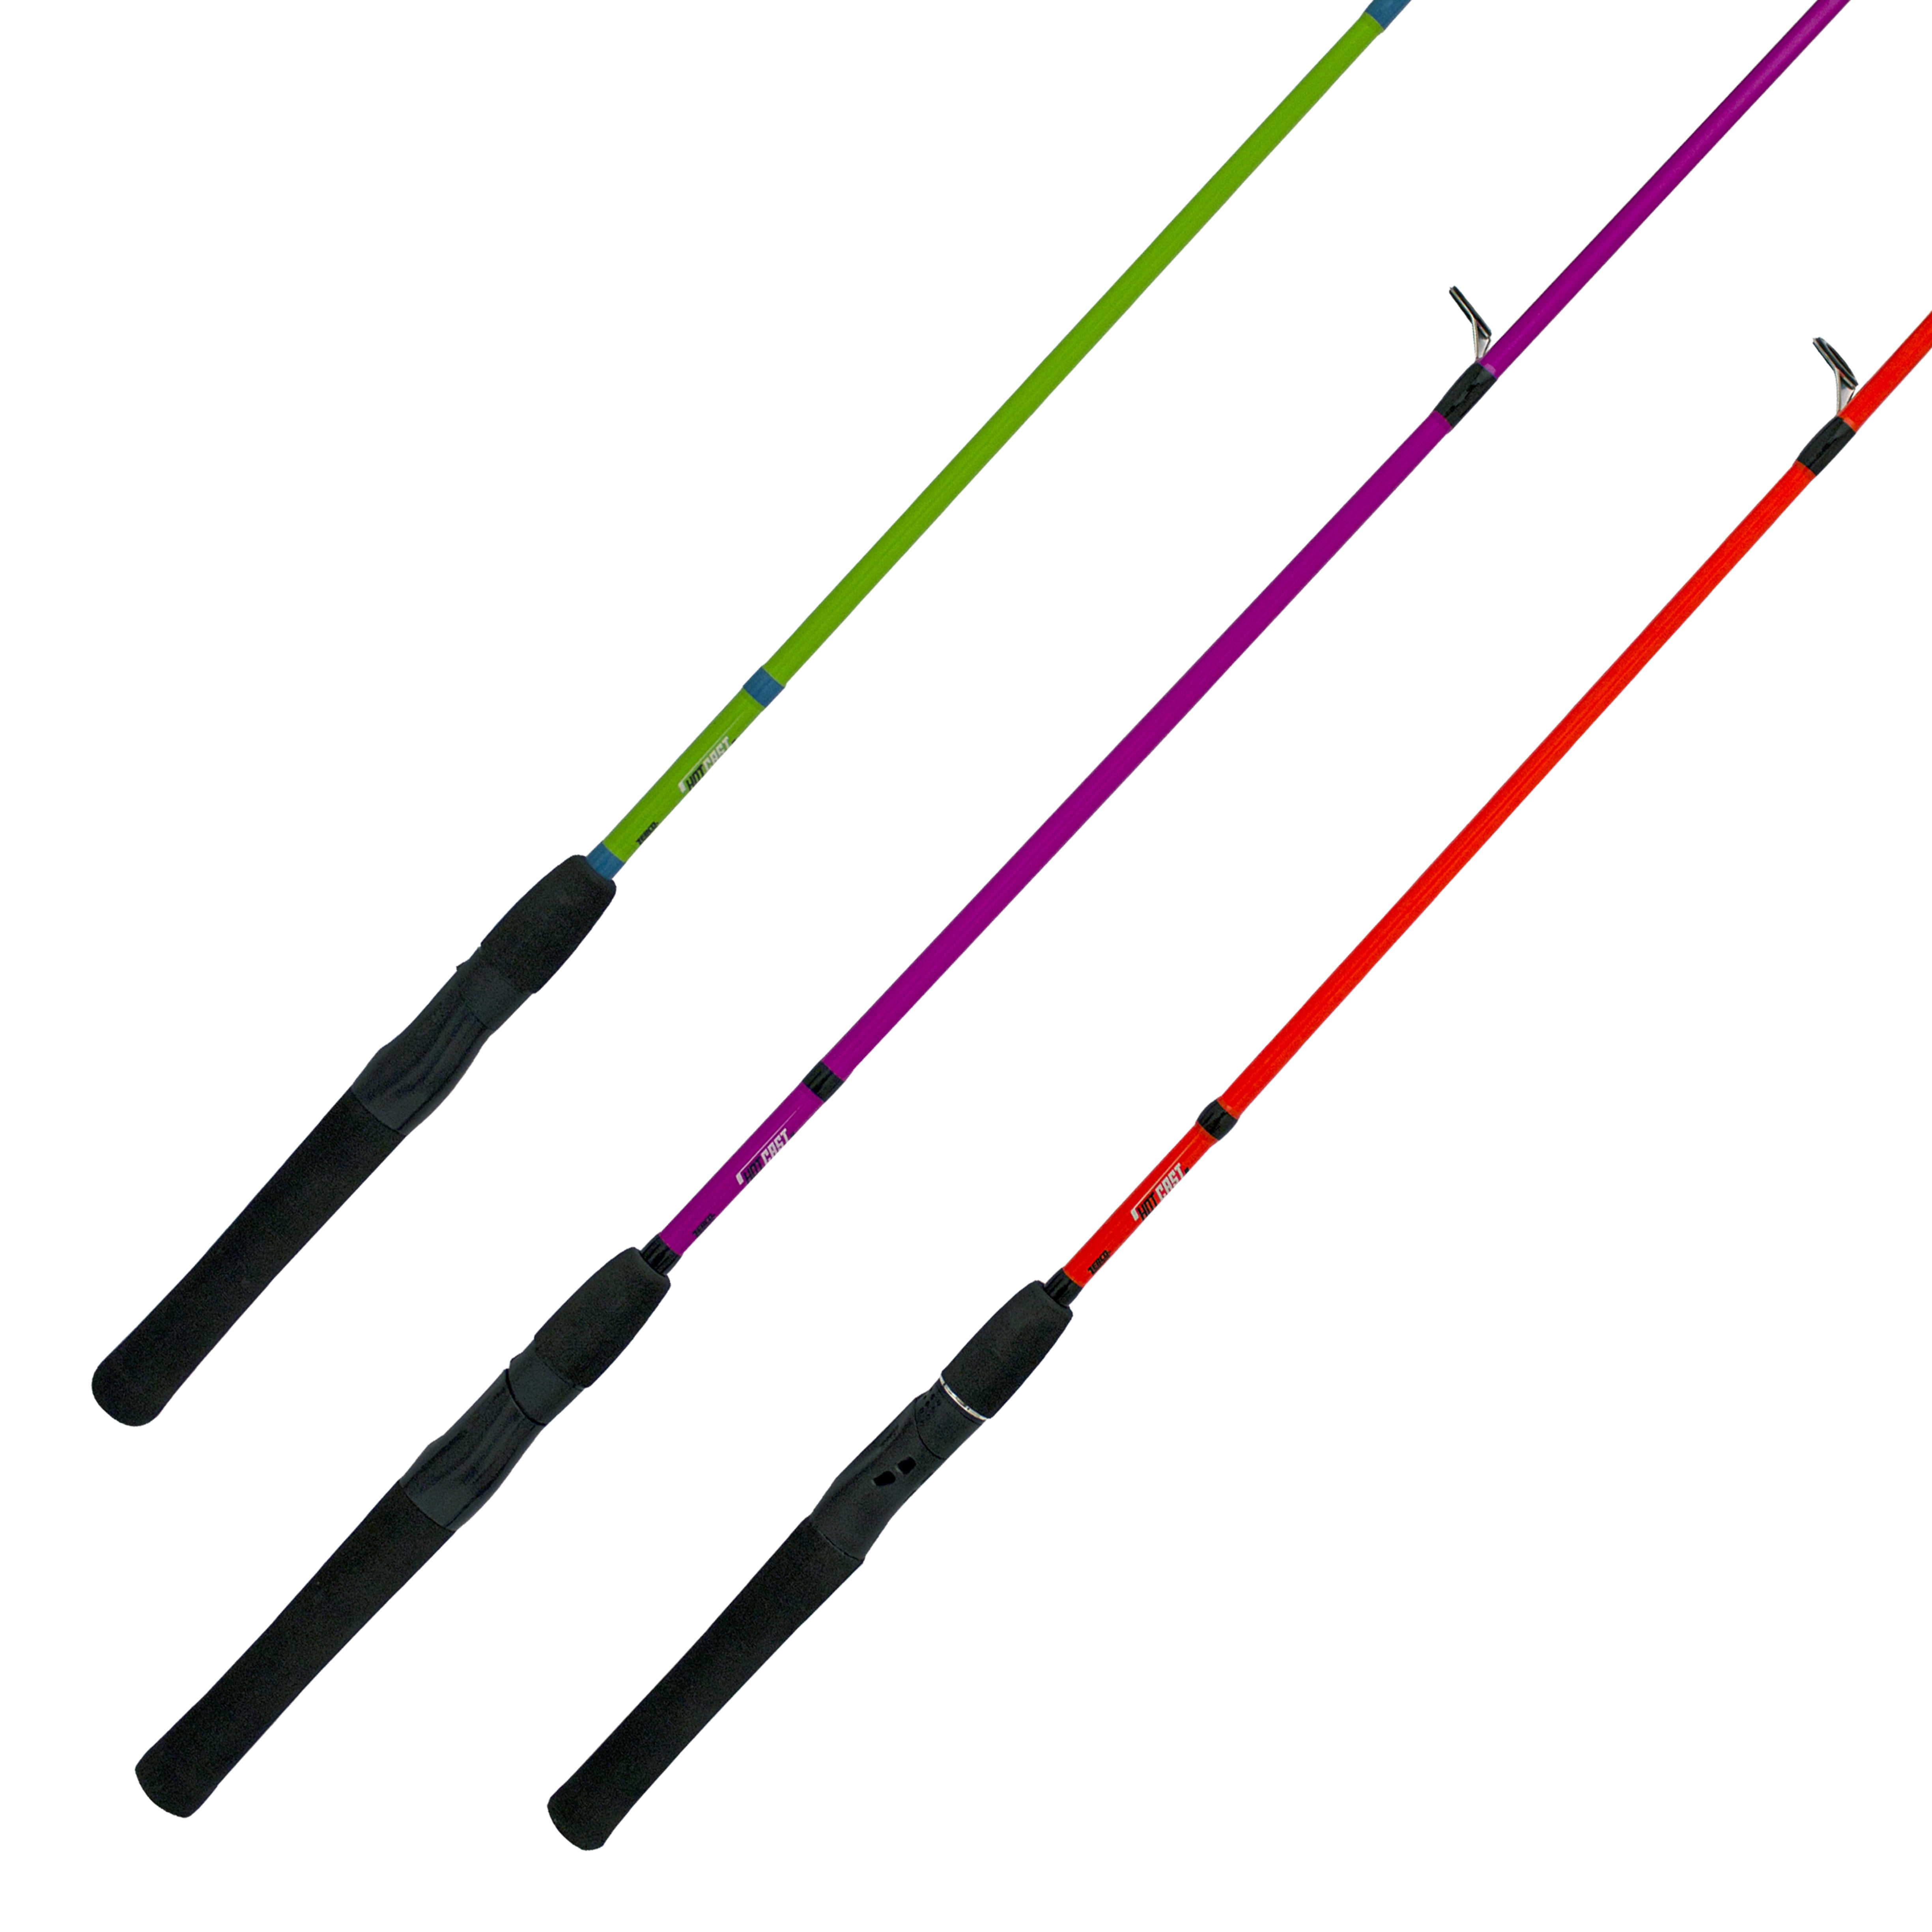 Zebco HotCast 2-Piece Spinning Fishing Rod, 4-Foot 6-inch (2-Piece Rod);  Assortment: Available in Green, Orange or Purple